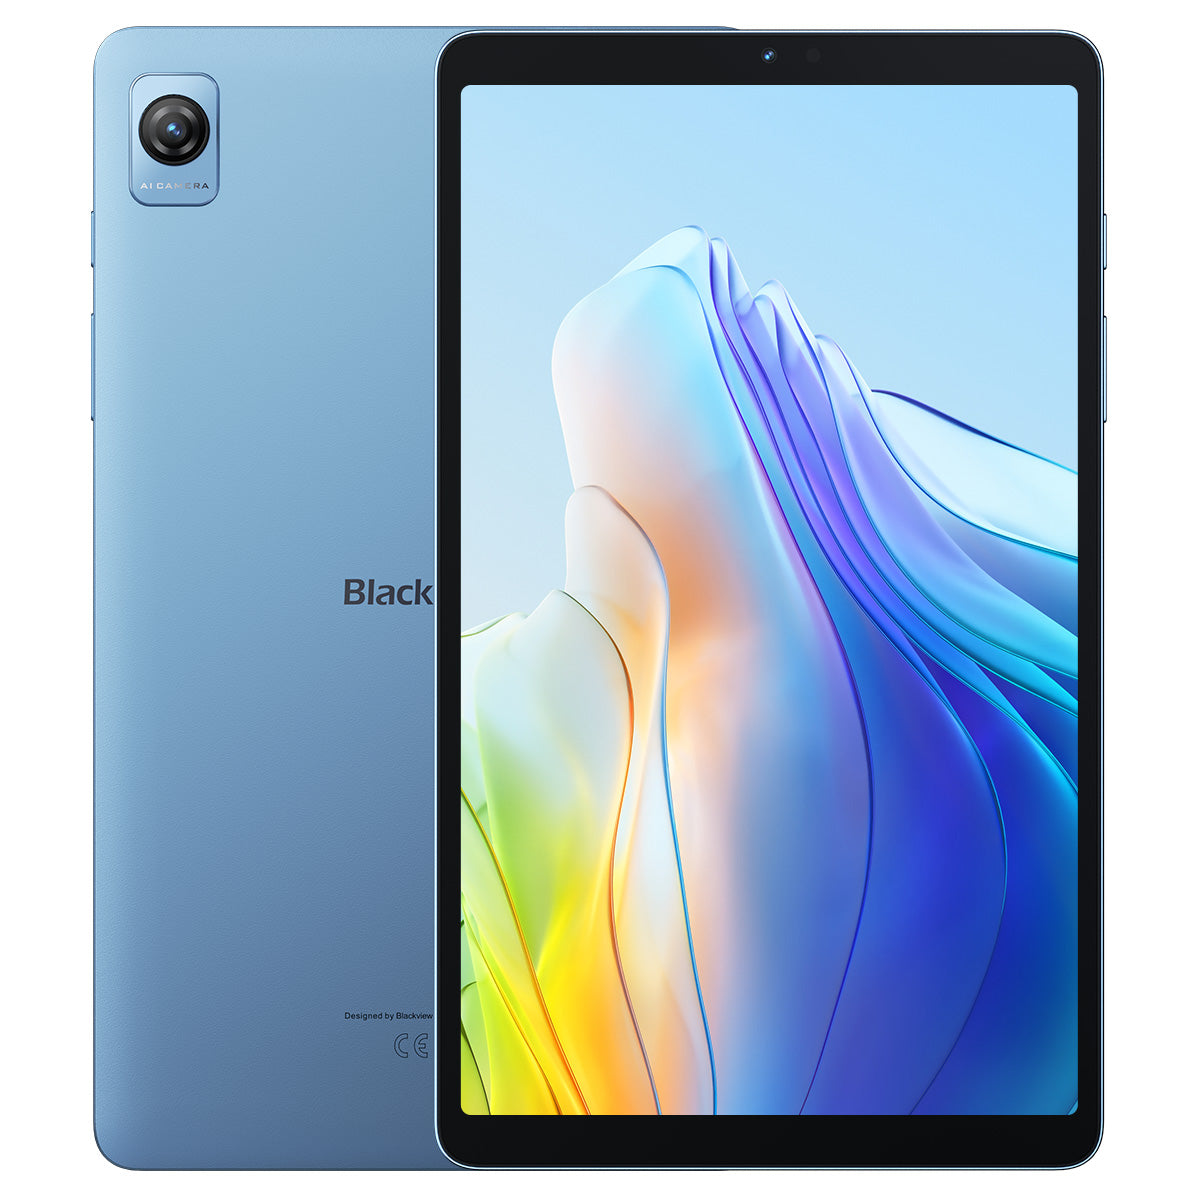 

Blackview Tab 60 8.68-inch Unisoc T606 Octa-core 4GB/6GB+128GB 6050mAh Widevine L1 Support Android Tablet PC 6GB+128GB / Blue